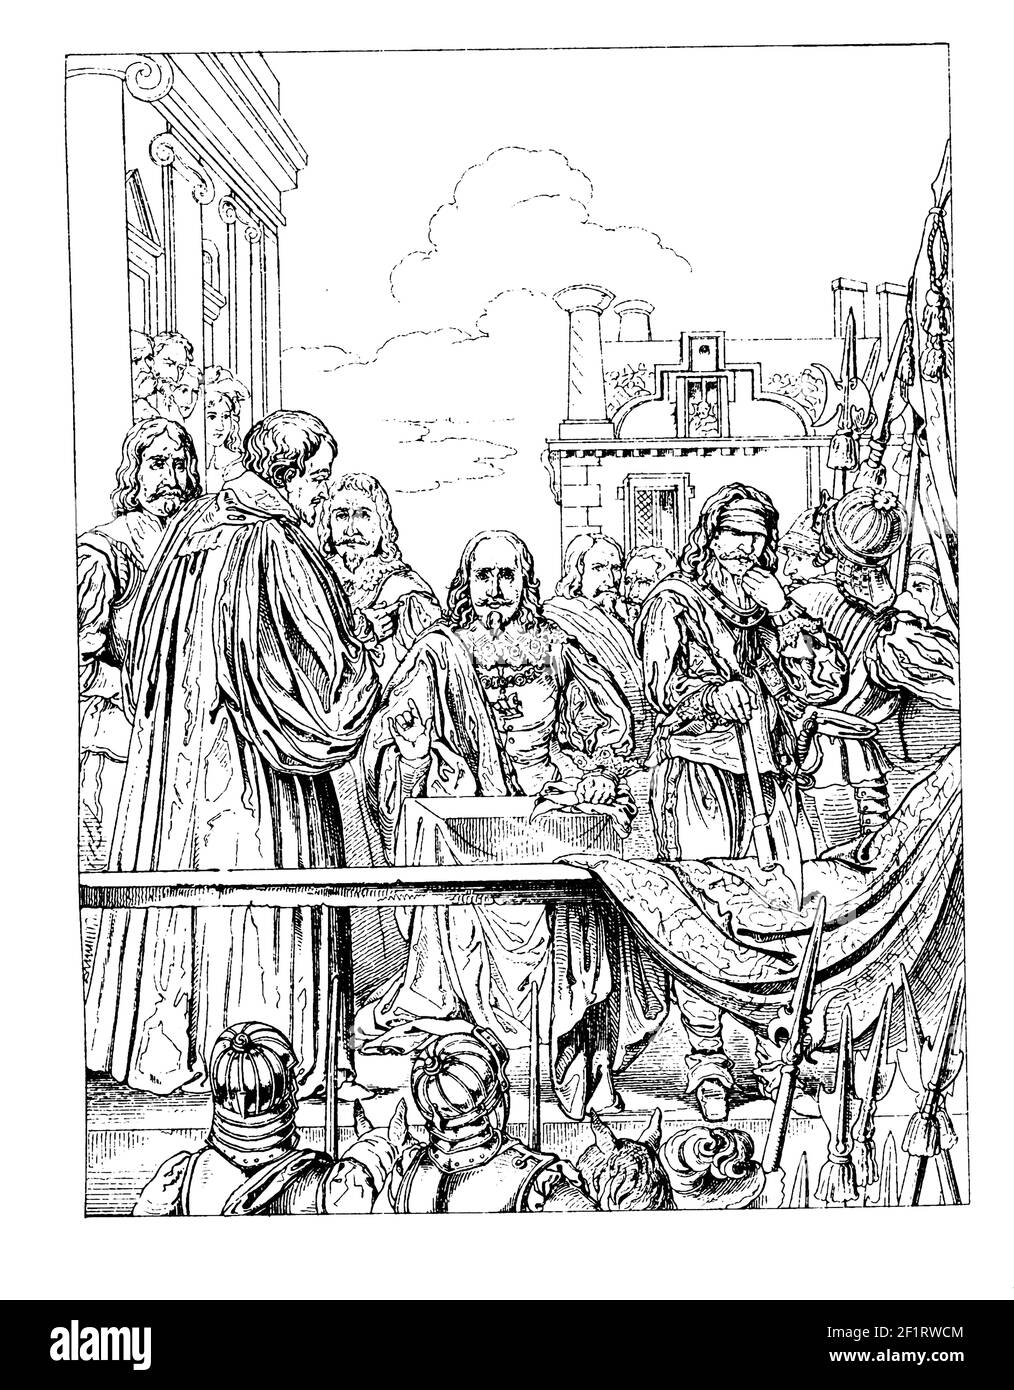 Antique illustration of the execution of Charles I, King of England, Scotland and Ireland. Engraving published in Bilder-Atlas zur Weltgeschichte nach Stock Photo